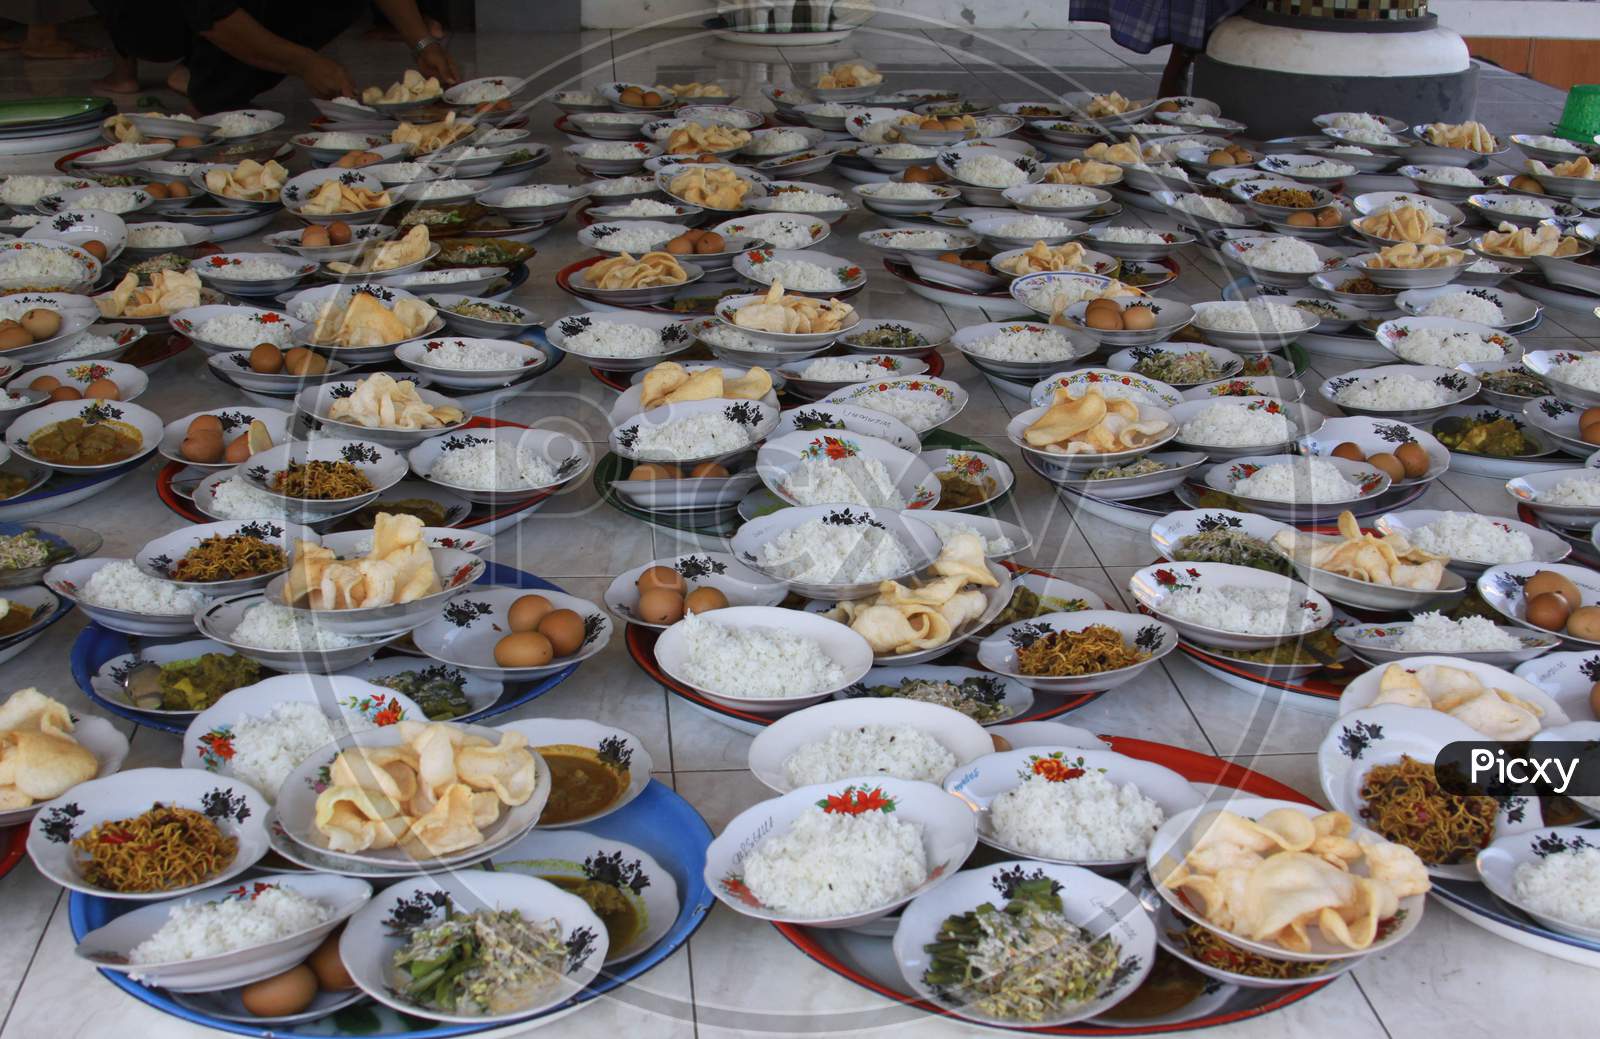 Plates With Food At A Ramadan Ceremony In Gili Air